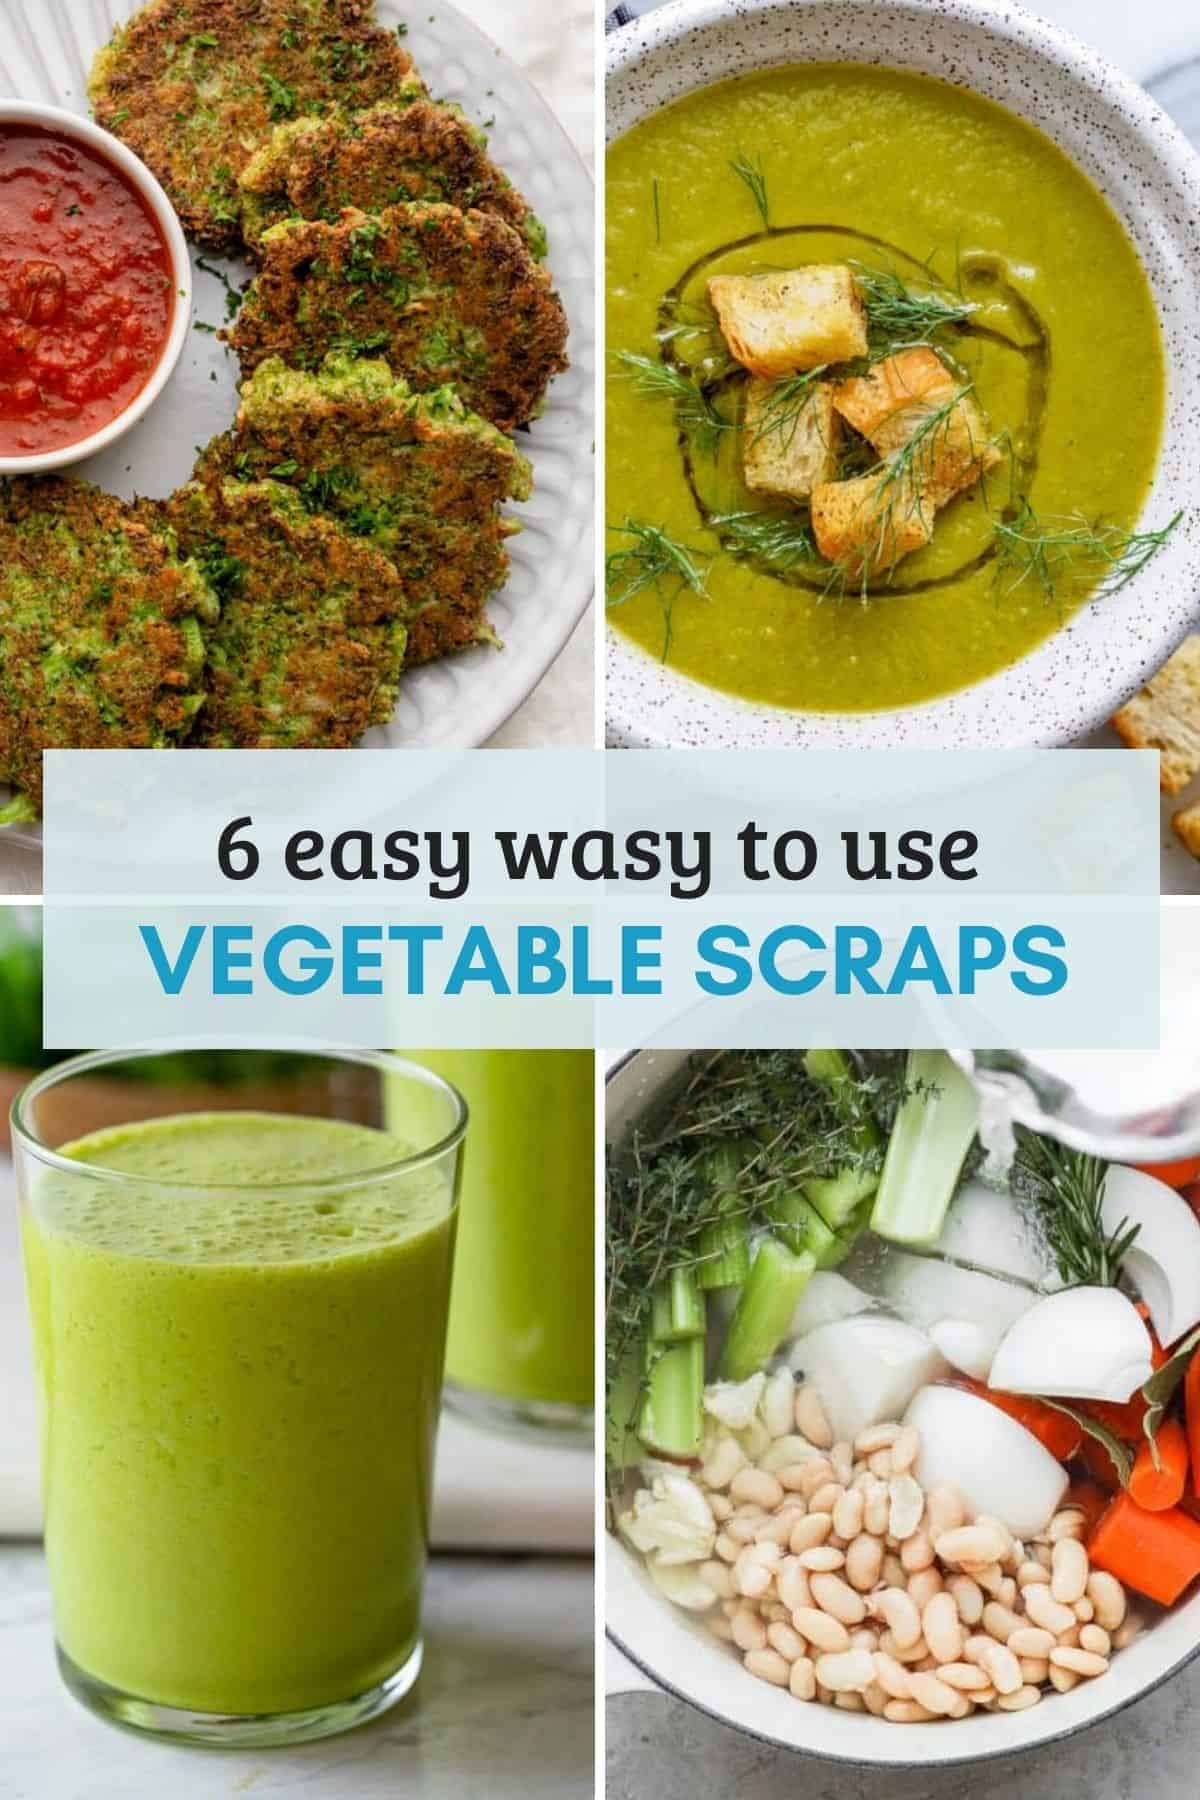 https://feelgoodfoodie.net/wp-content/uploads/2020/11/Roundup_Vegetable-Scraps-Recipes.jpg